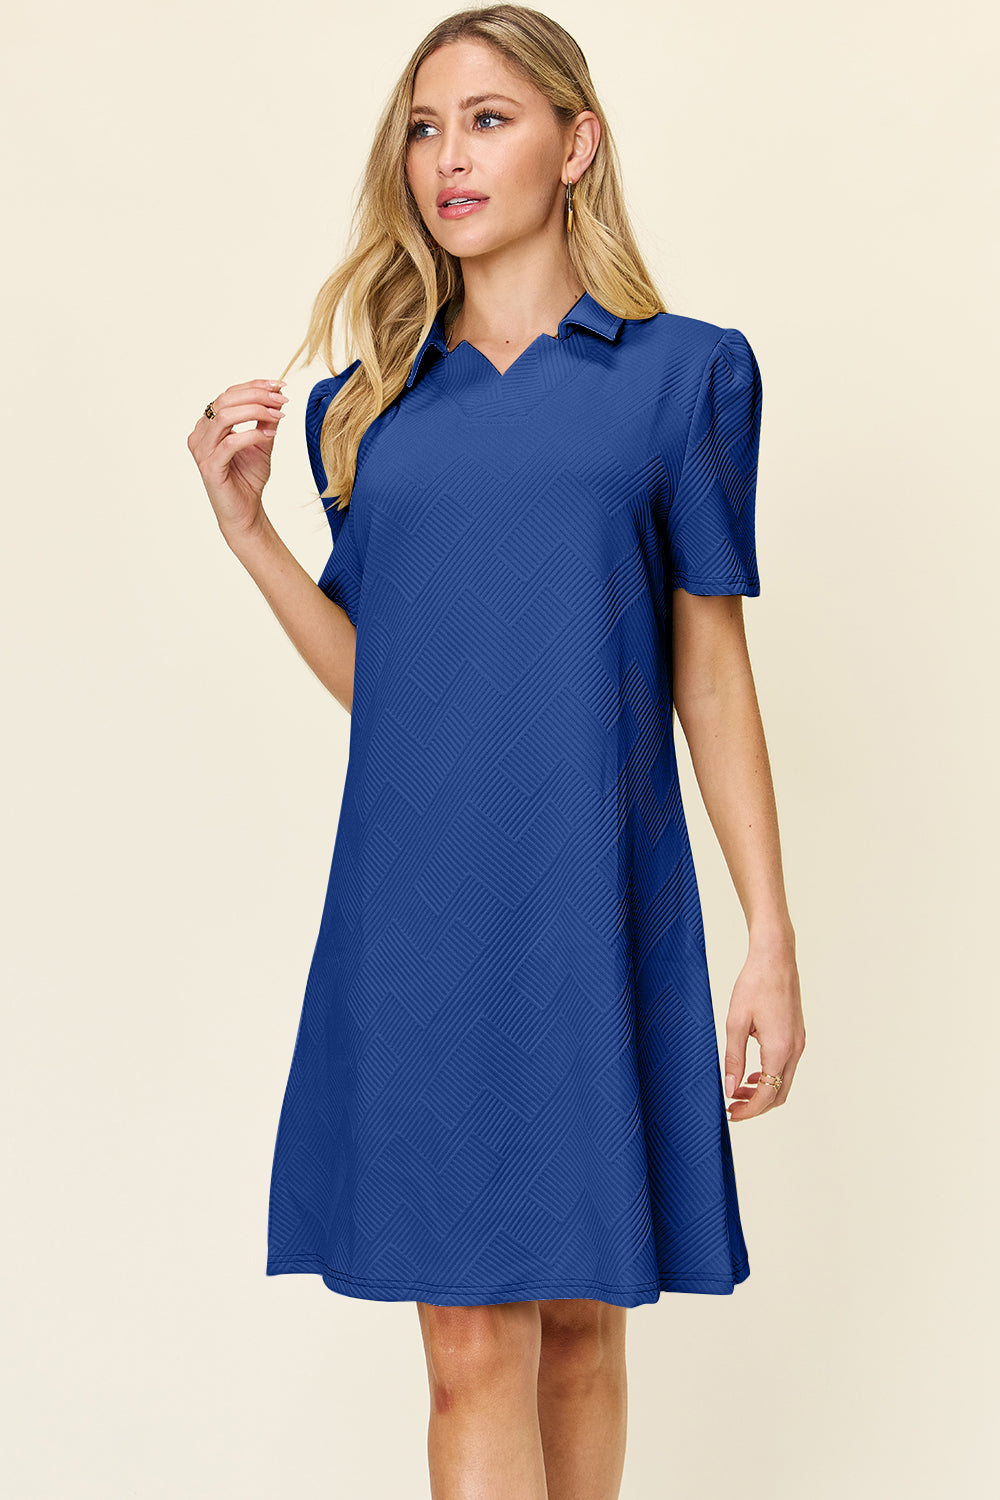 Double Take Full Size Texture Collared Neck Short Sleeve Dress Royal Blue